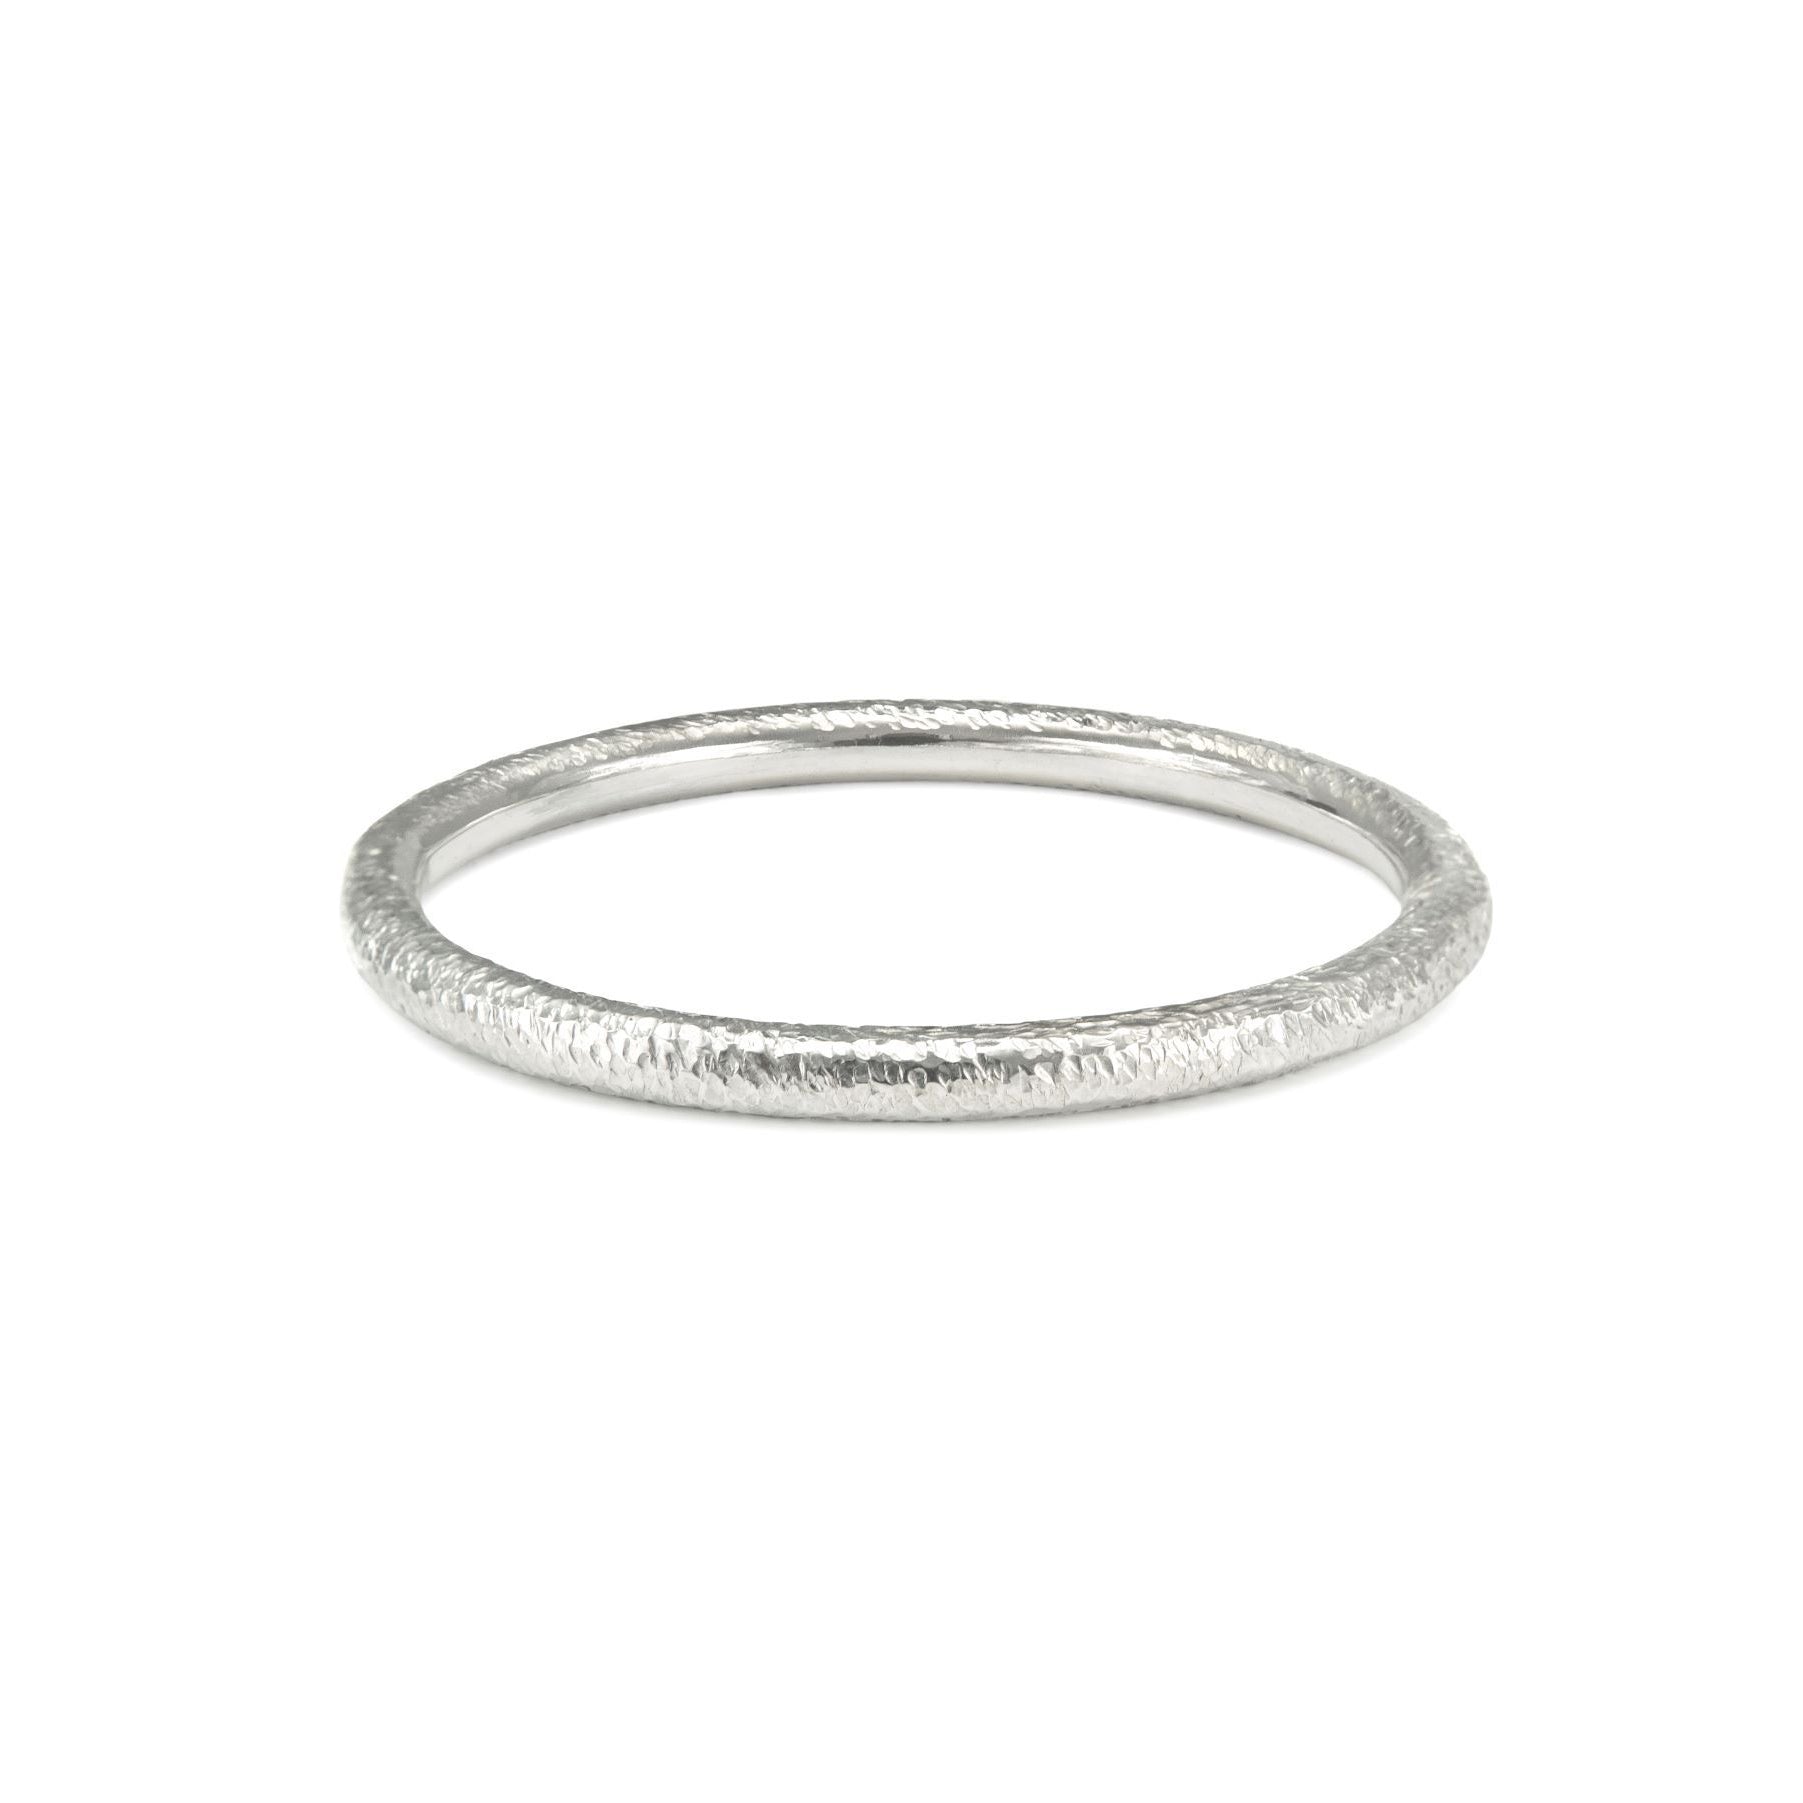 High Polished Textured Silver Bangle - Romany Starrs